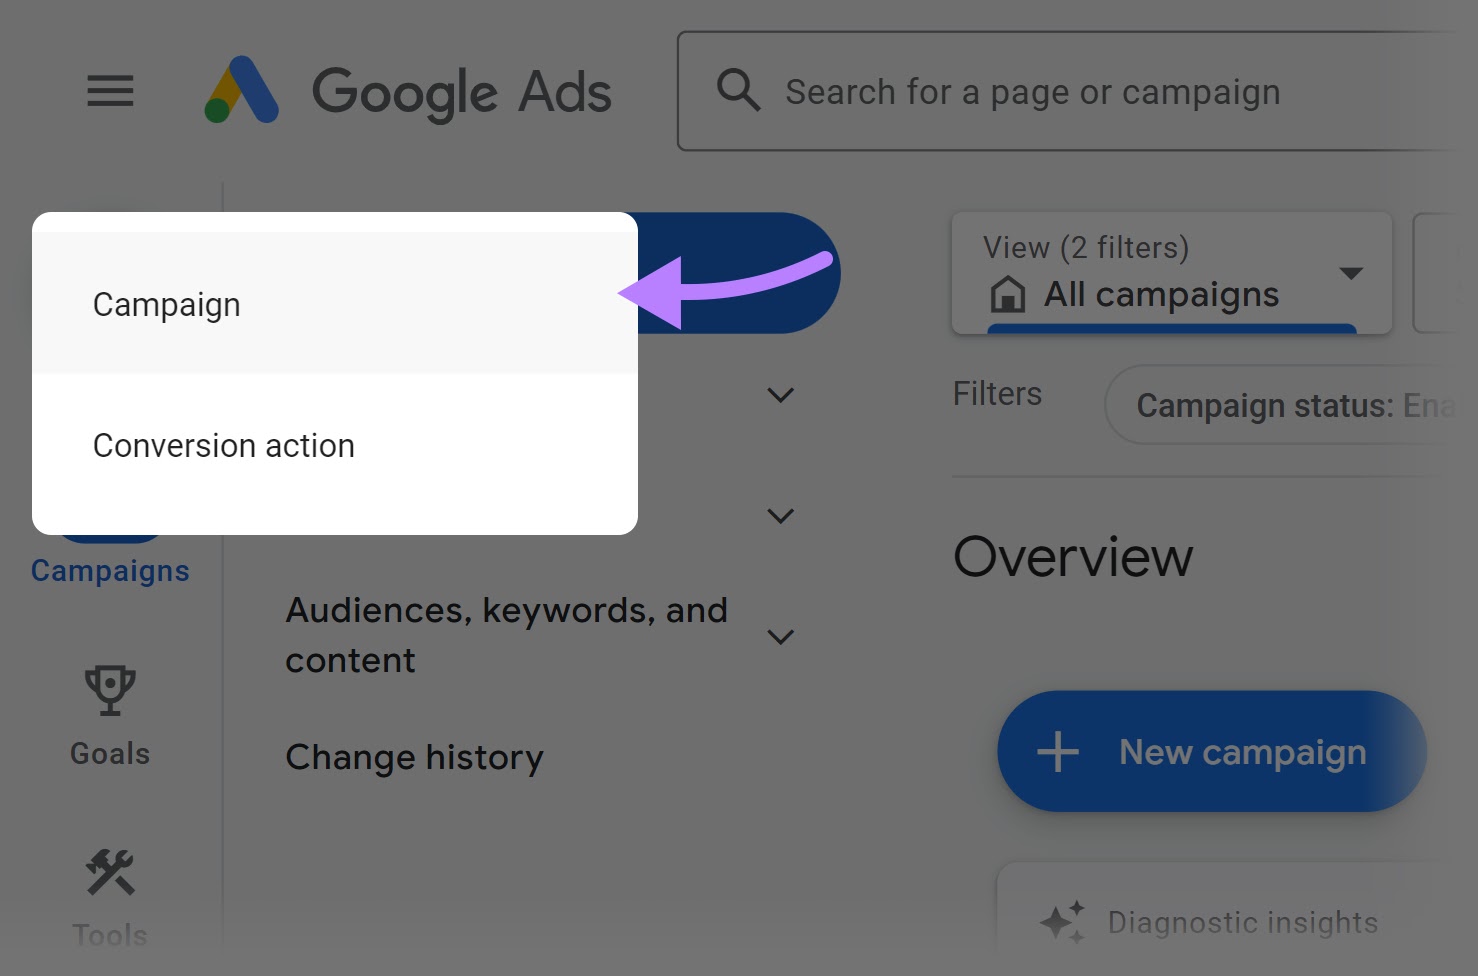 "Campaign" selected from the Google Ads "create" drop-down